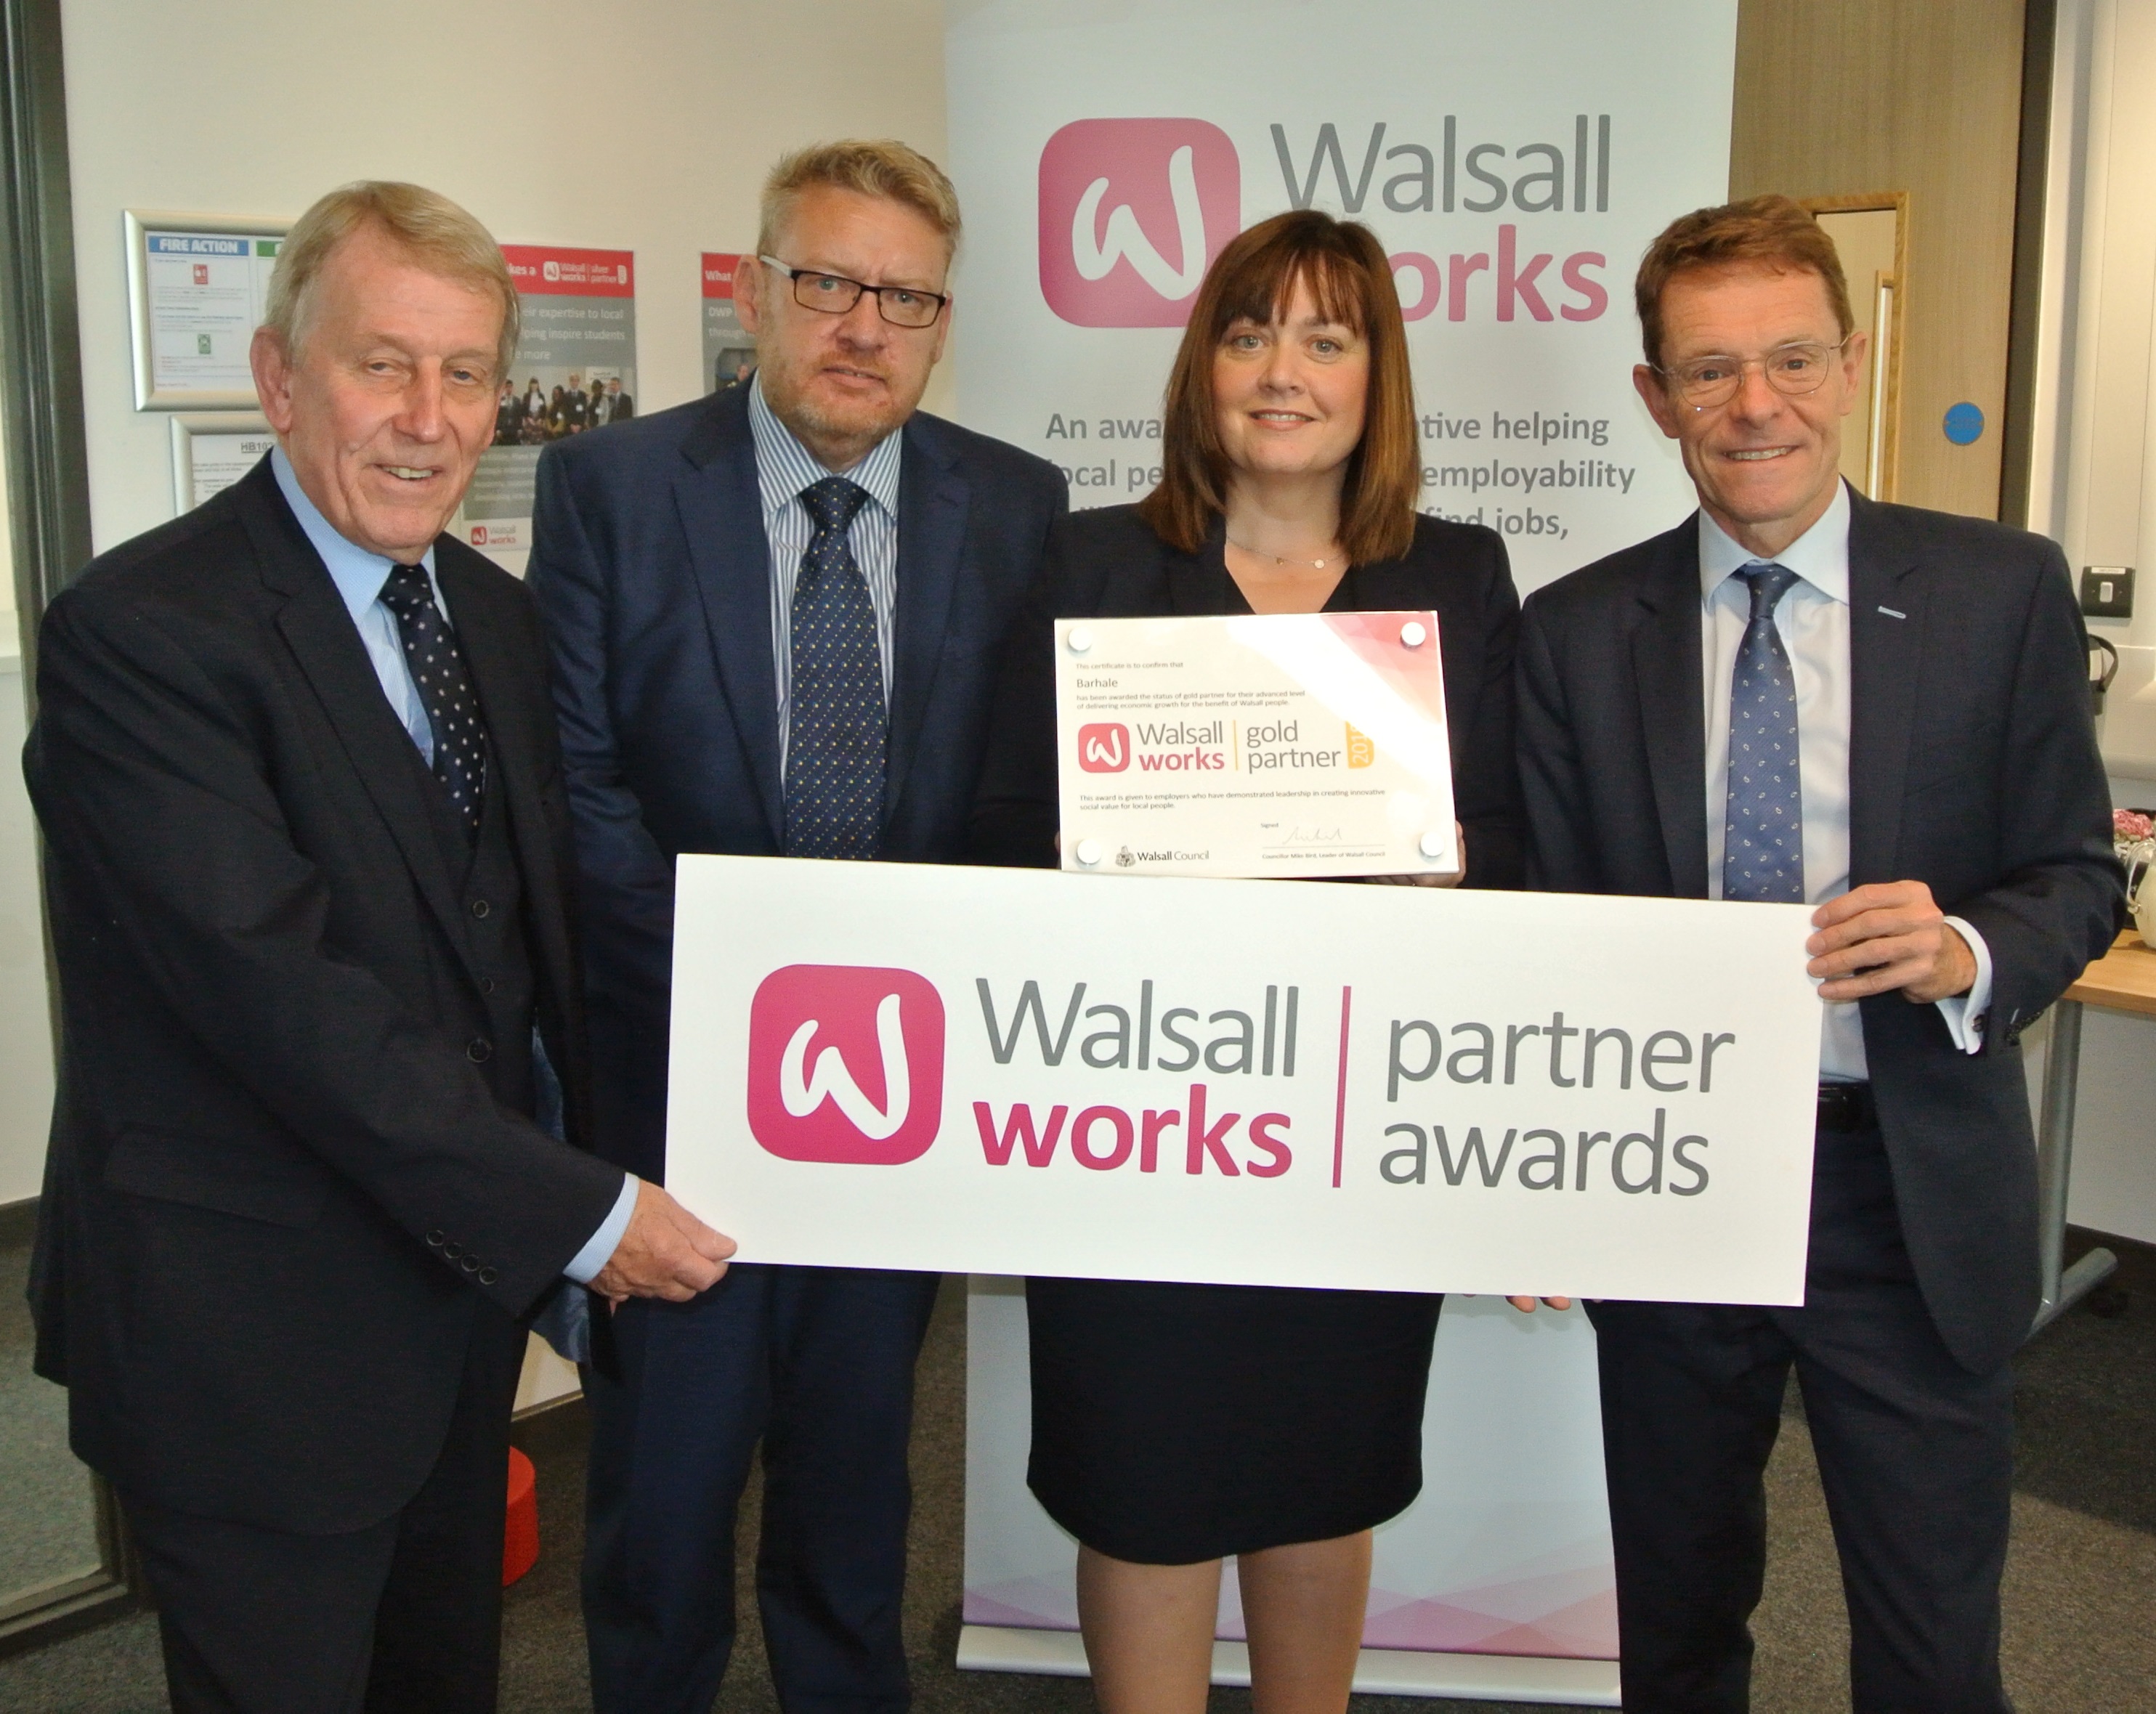 Winners of the Walsall works partner awards